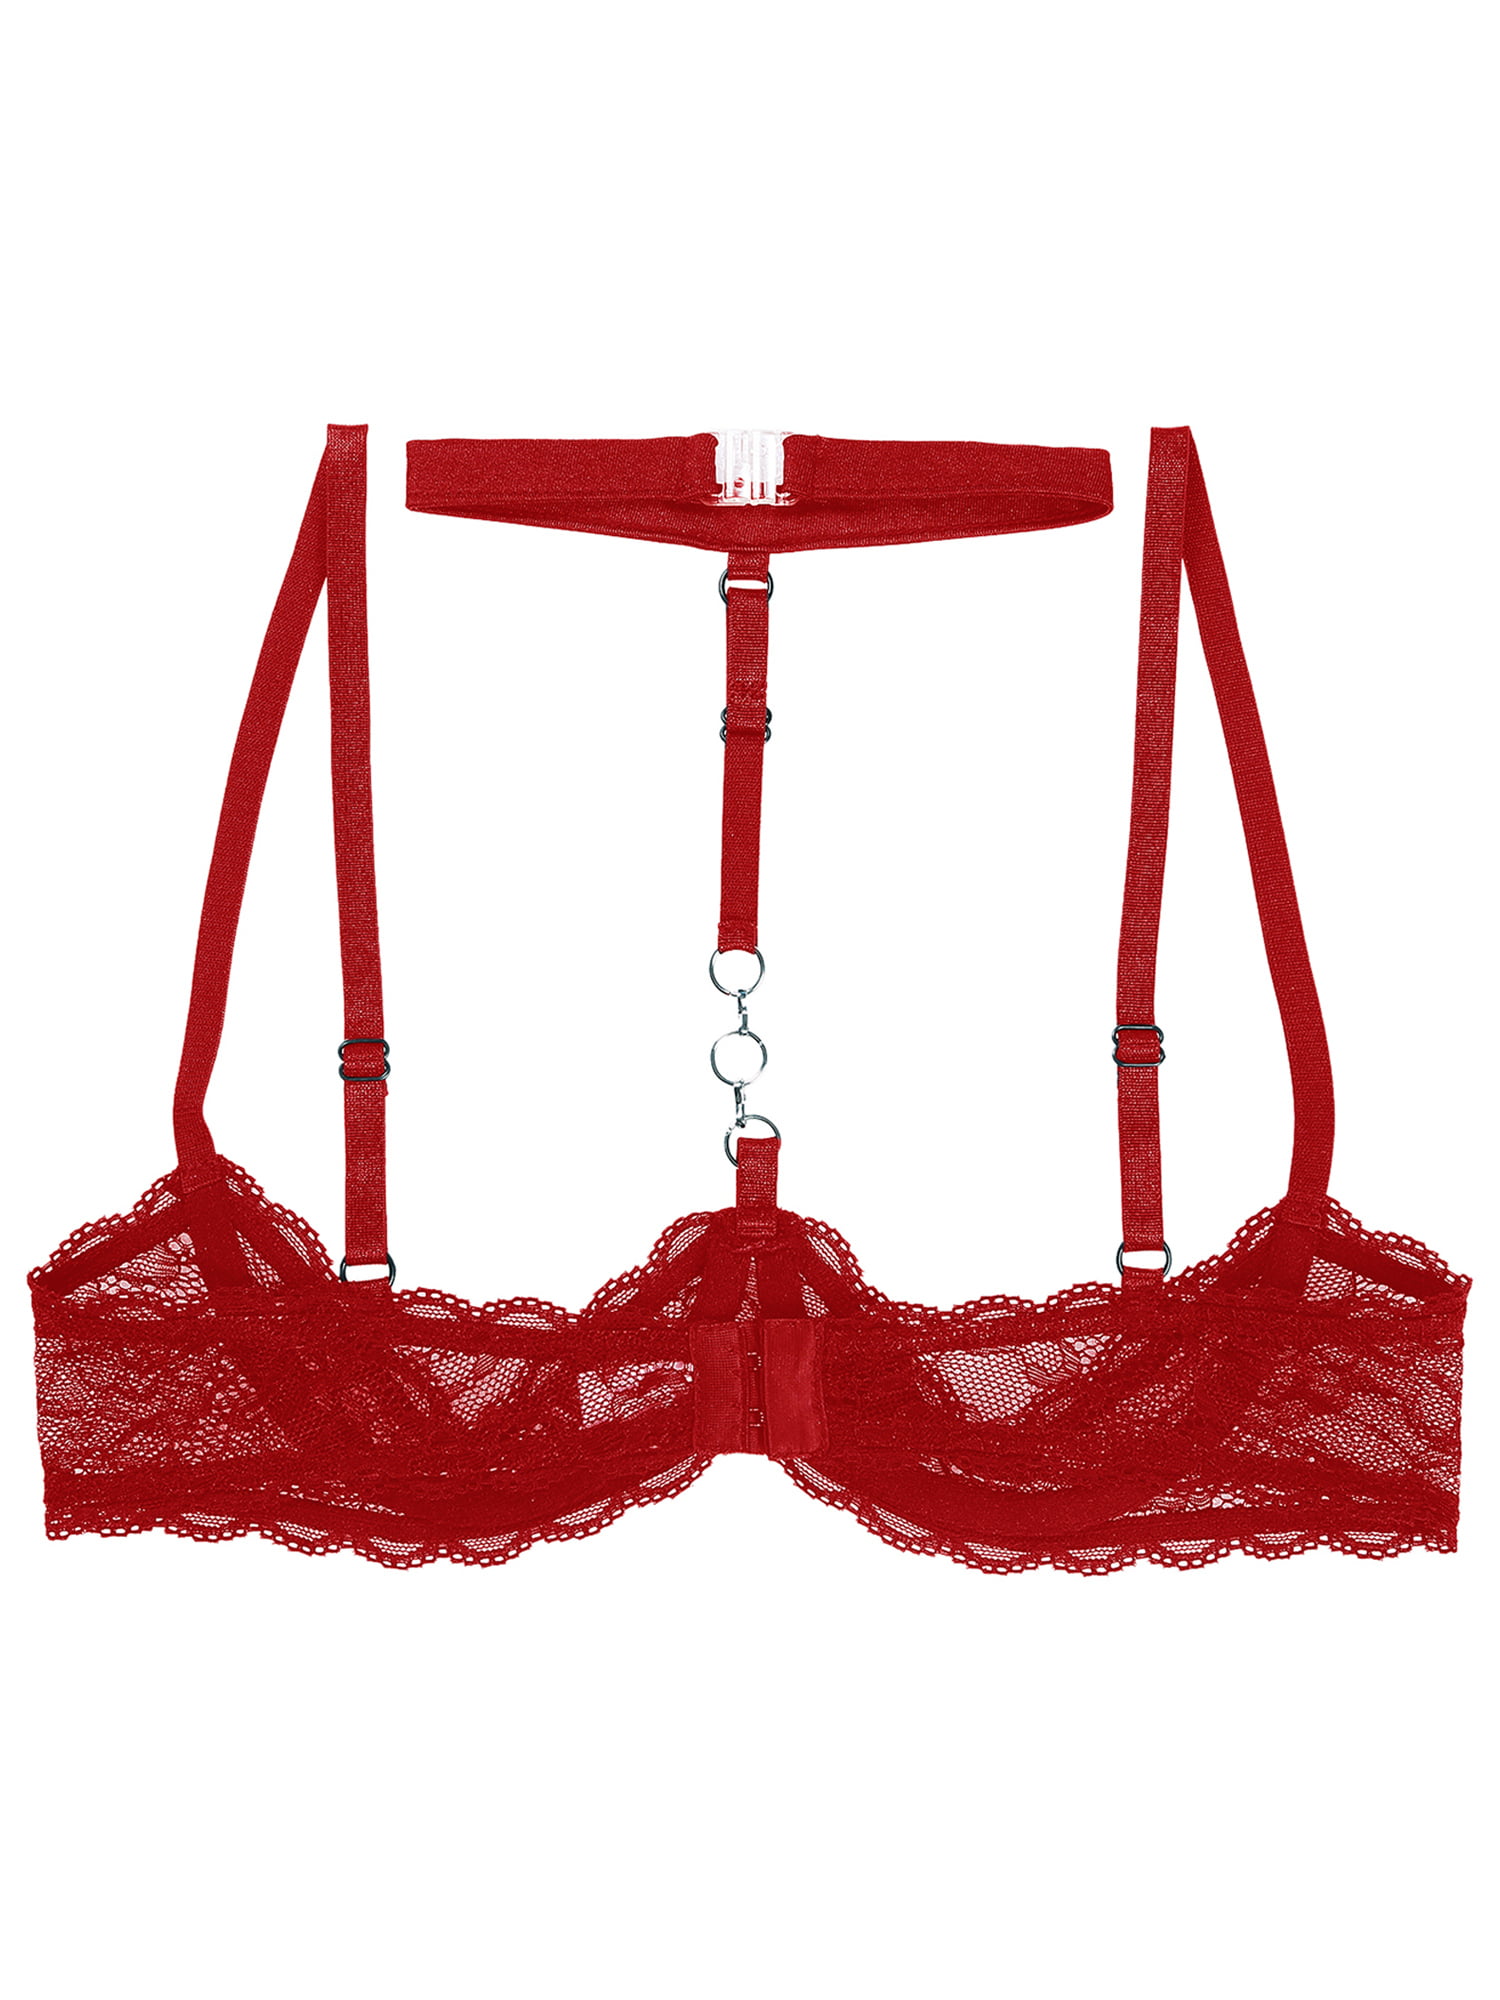 DPOIS Women's Lace 1/4 Cups Bra Halter Neck O Ring Underwire Red